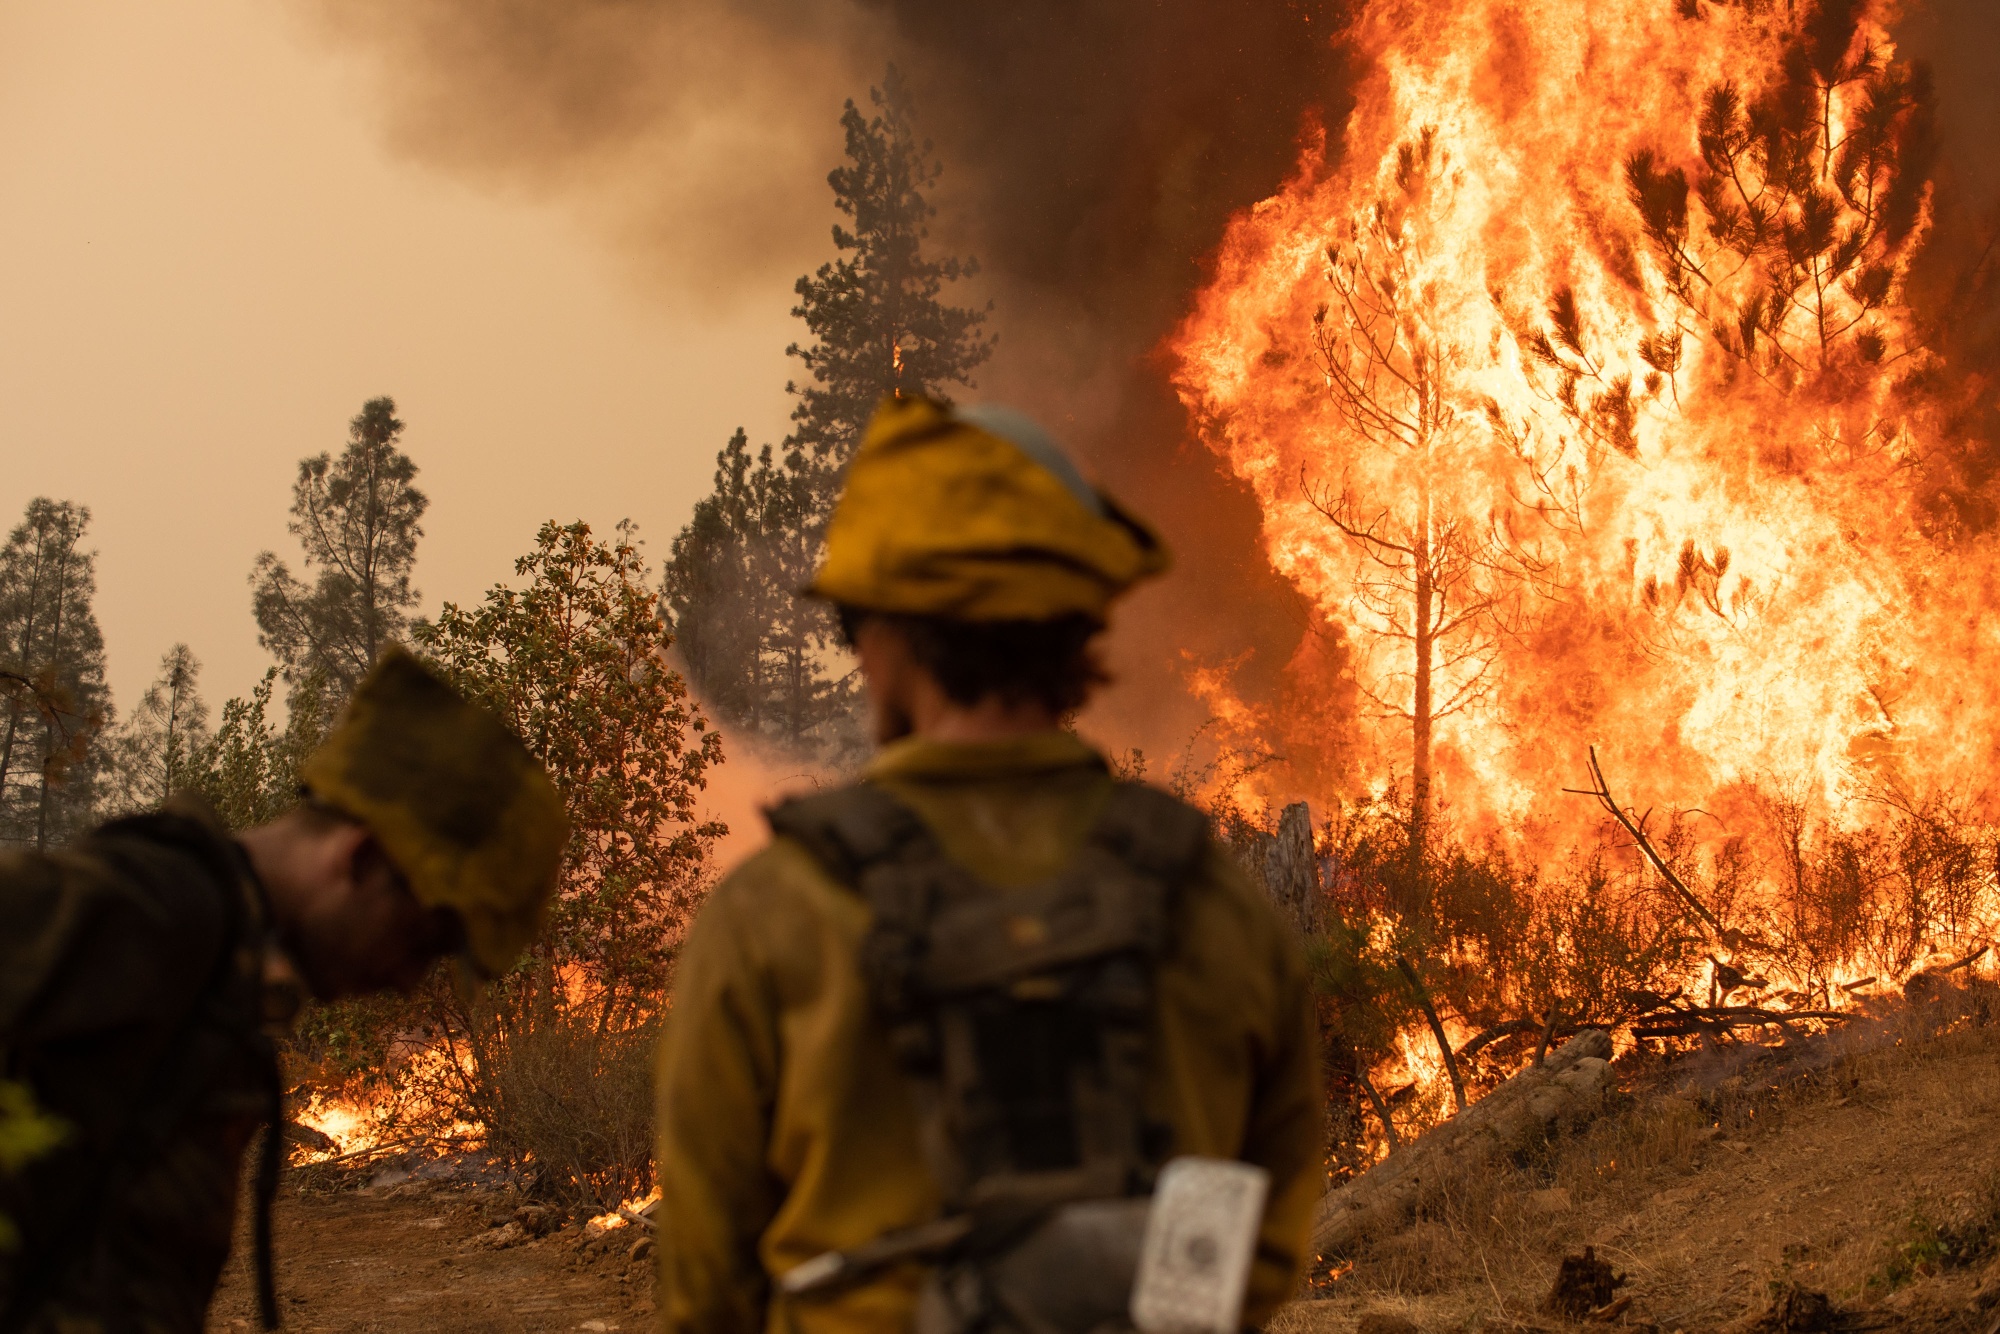 California Fire Season to Get Snuffed Out as Pacific Storm Nears